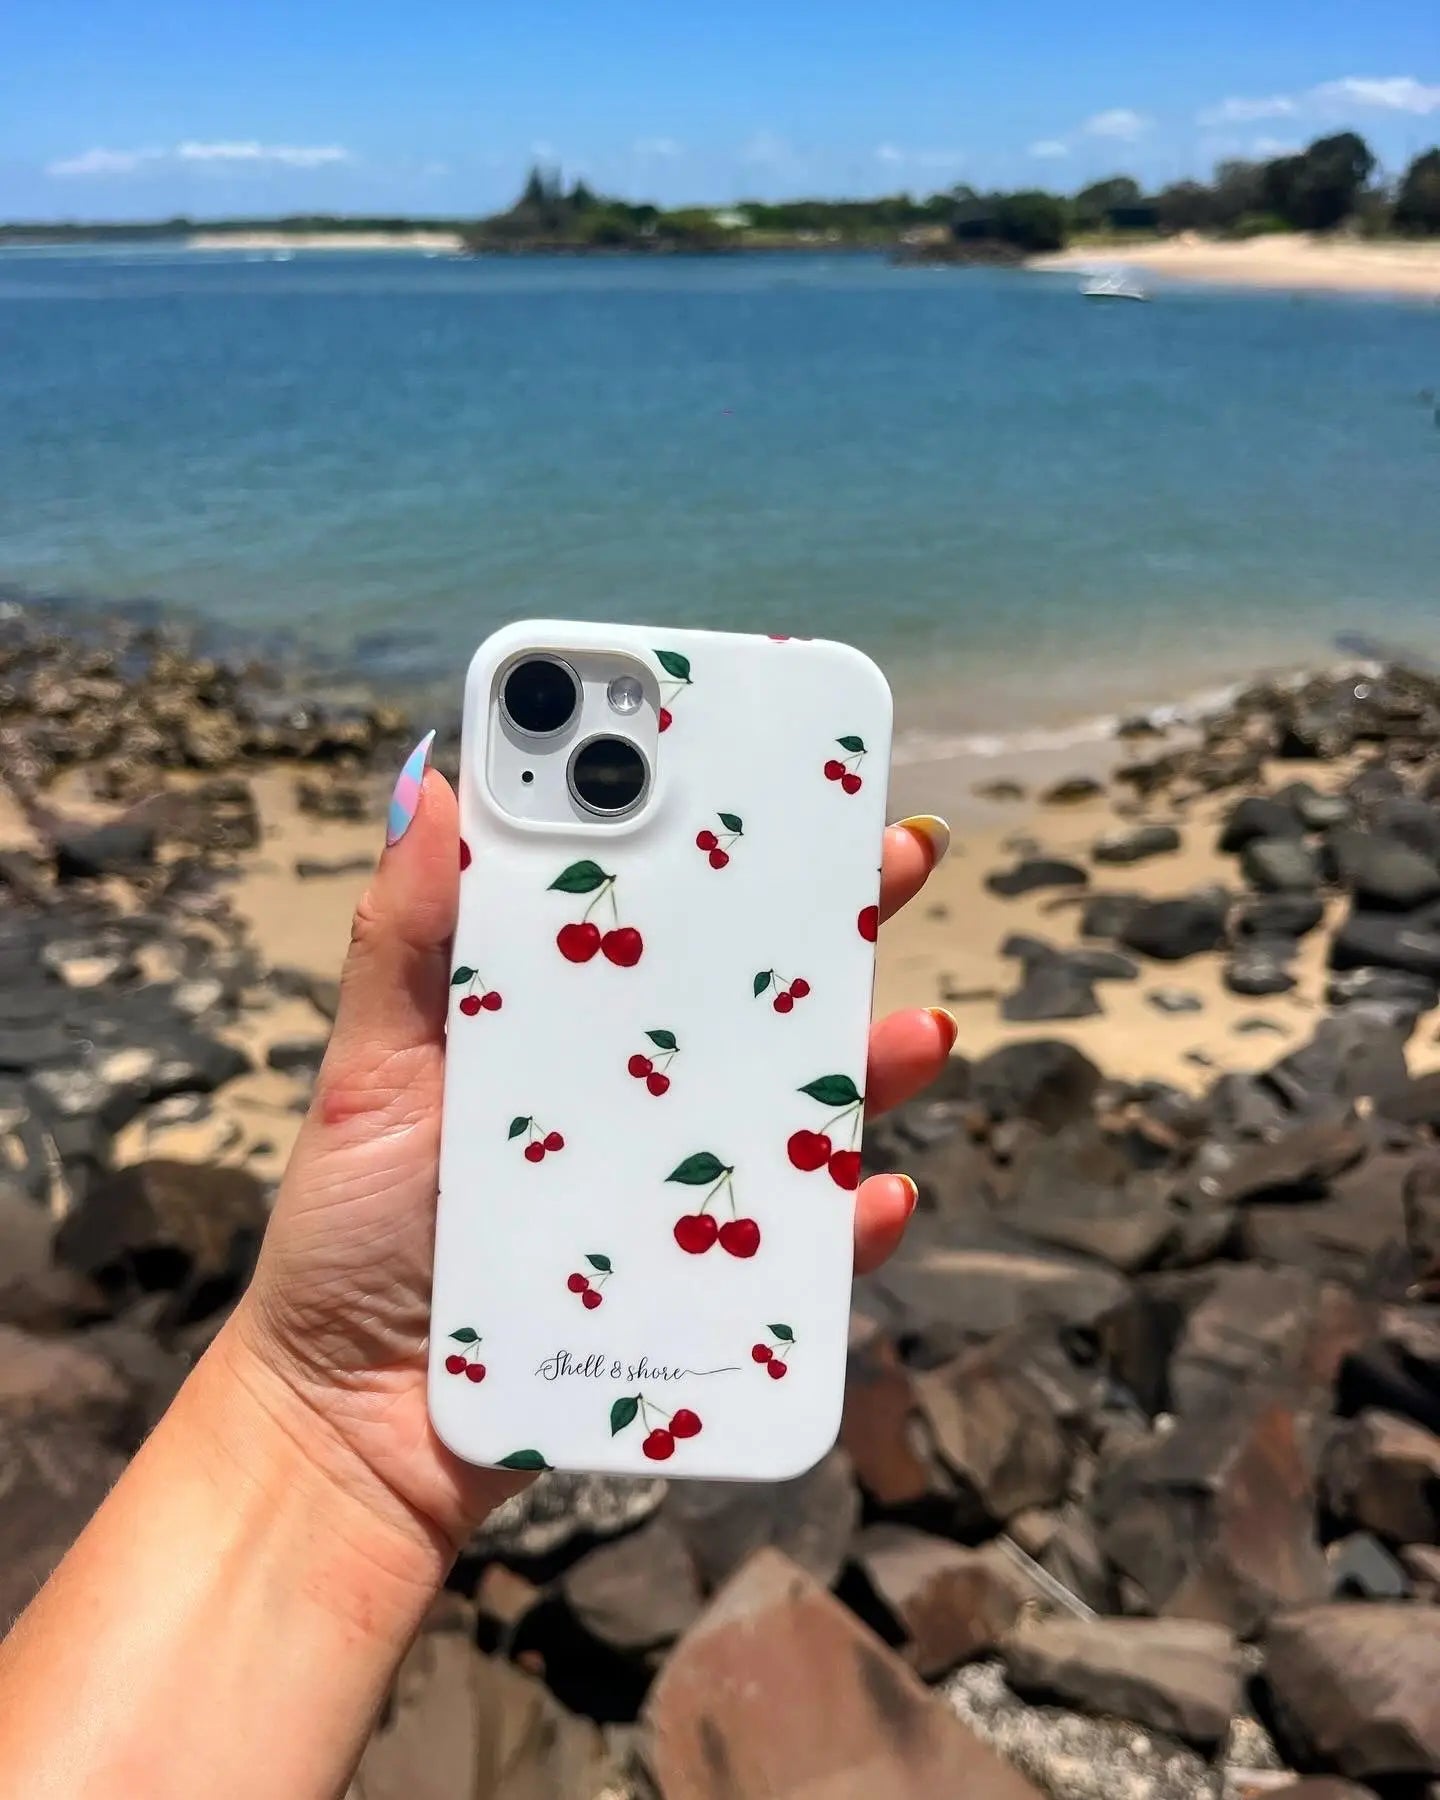 CherryPop iPhone Case Shell And Shore